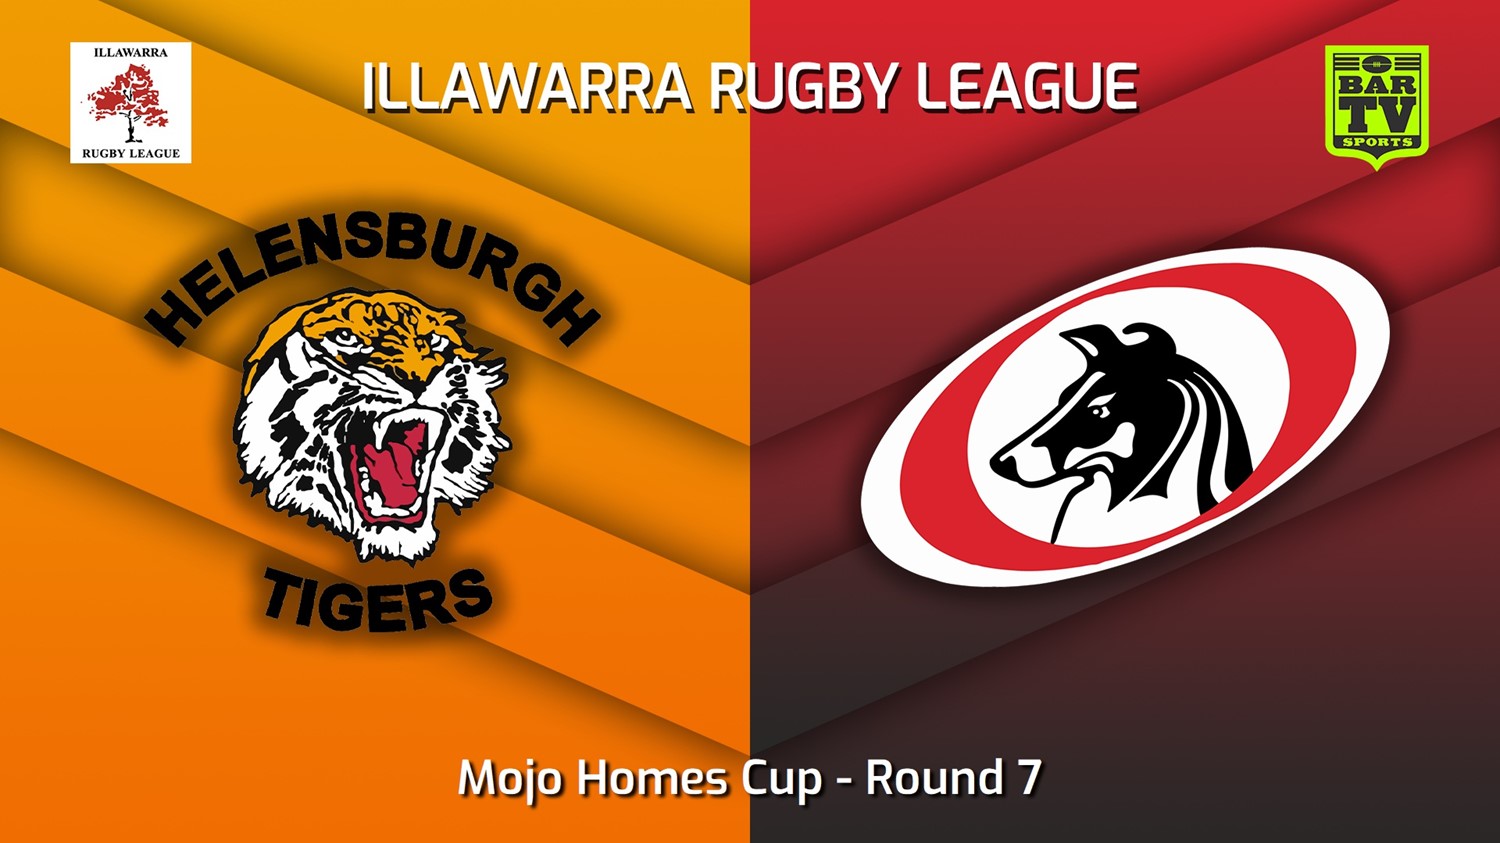 220618-Illawarra Round 7 - Mojo Homes Cup - Helensburgh Tigers v Collegians Slate Image